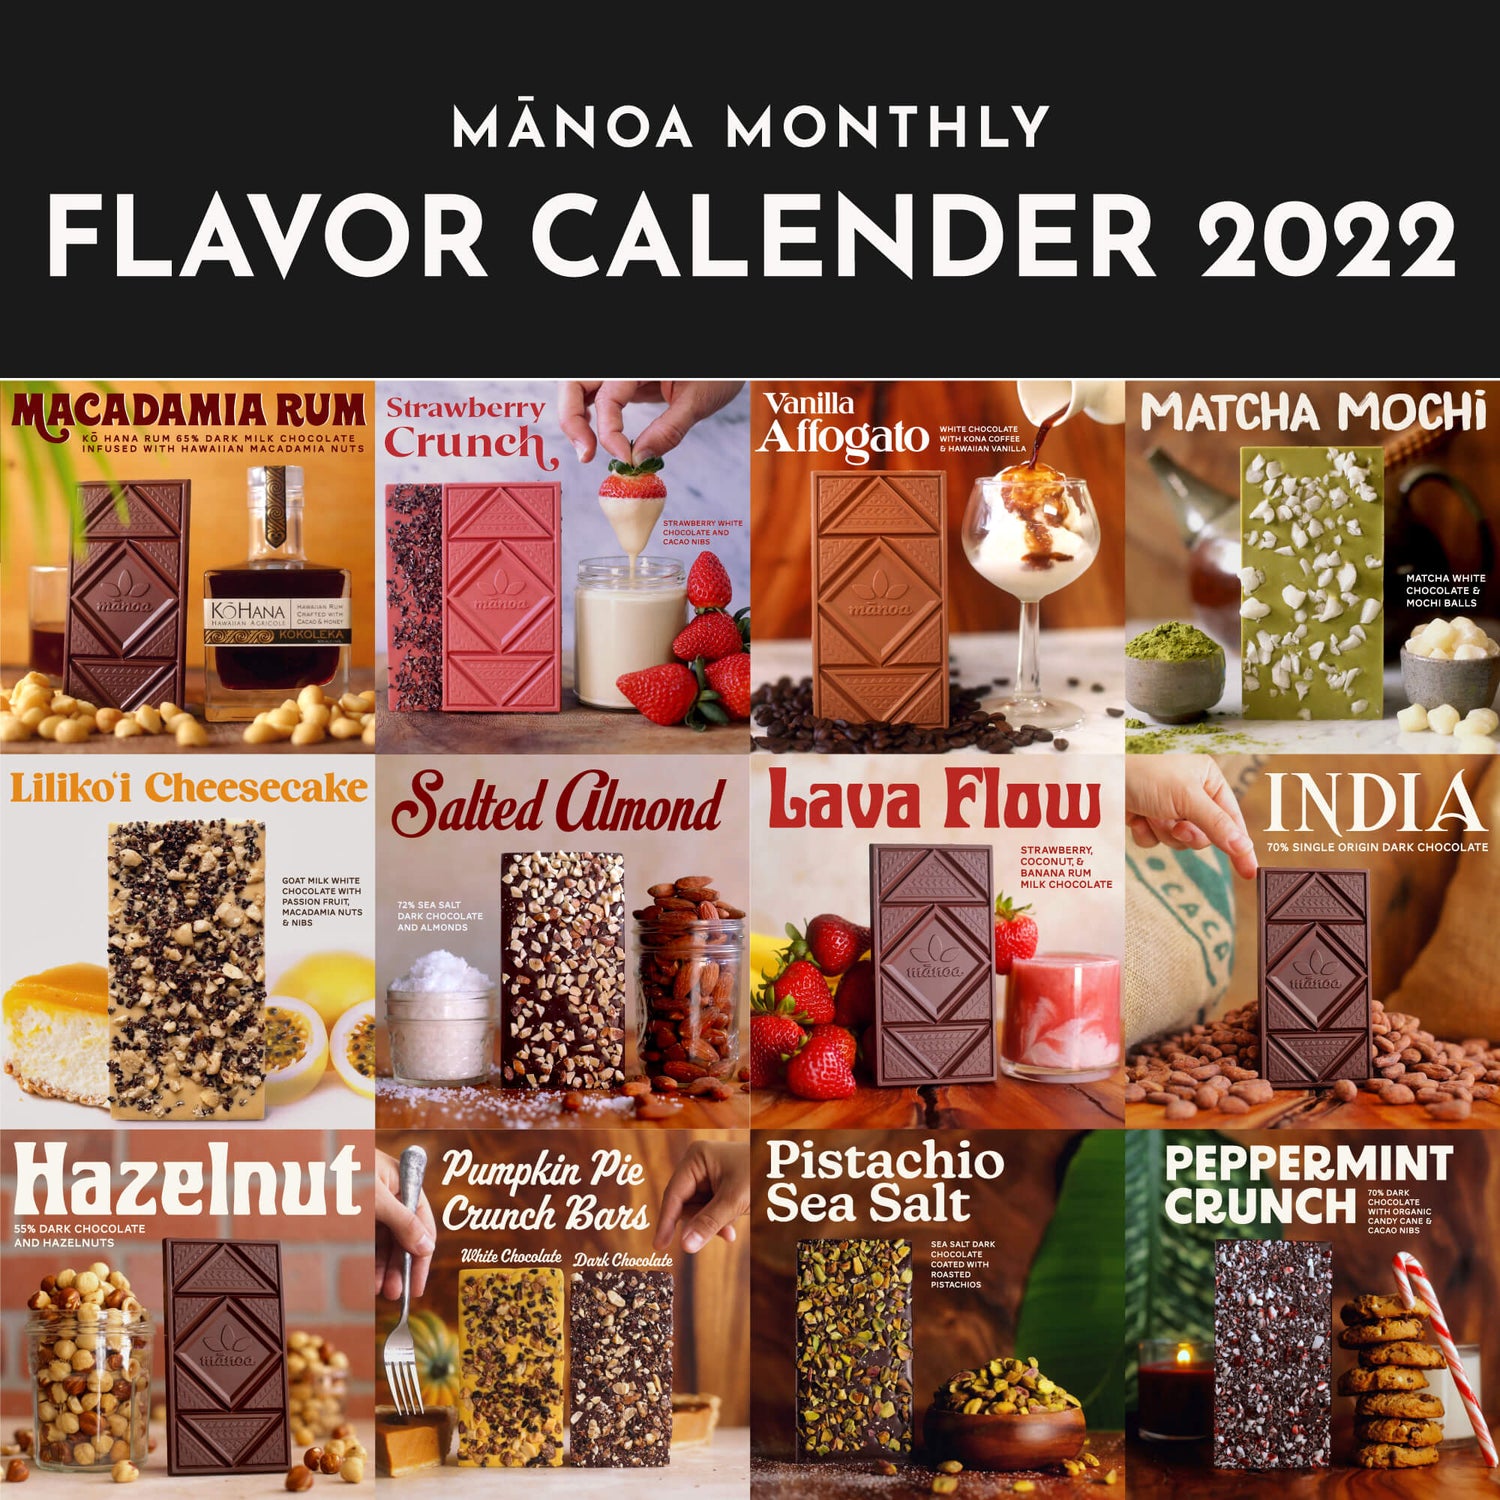 12 different Manoa monthly chocolate bar flavors